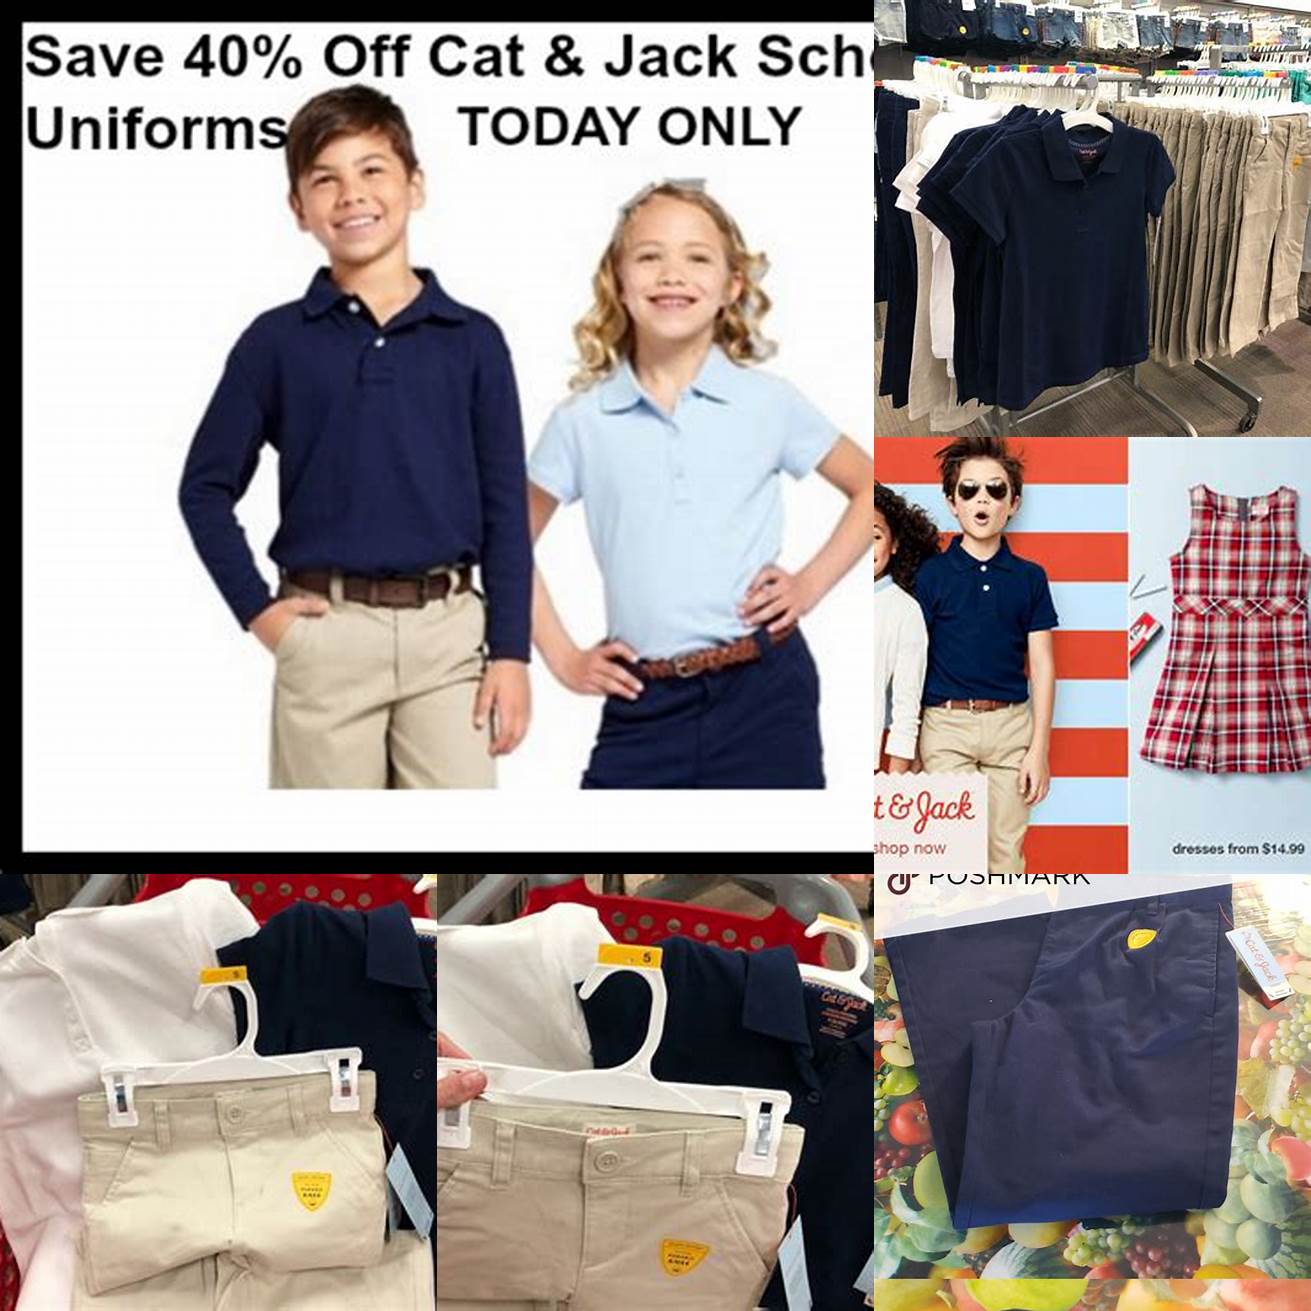 Q Do Cat and Jack uniforms come in plus sizes